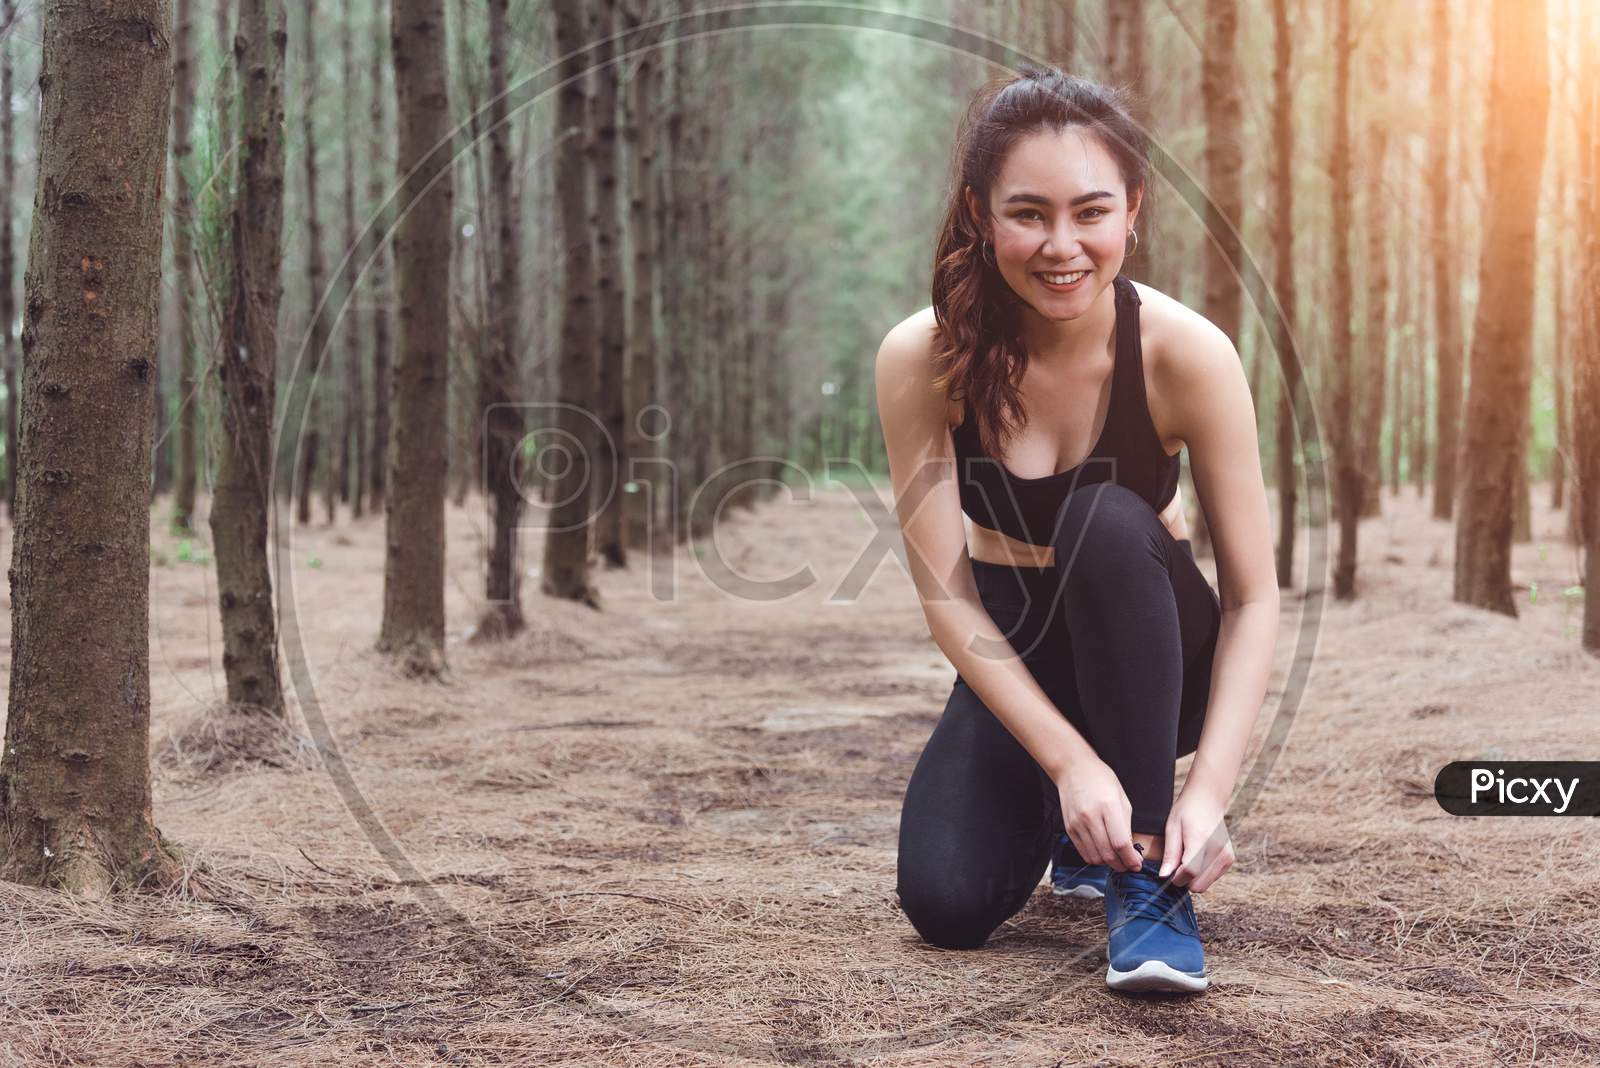 Woman Tying Up Shoelaces When Jogging In Forest Back With Drinking Water Bottle Beside Hers. Sneakers Rope Tying. People And Lifestyles Concept. Healthcare And Wellness Theme. Park And Outdoors Theme.